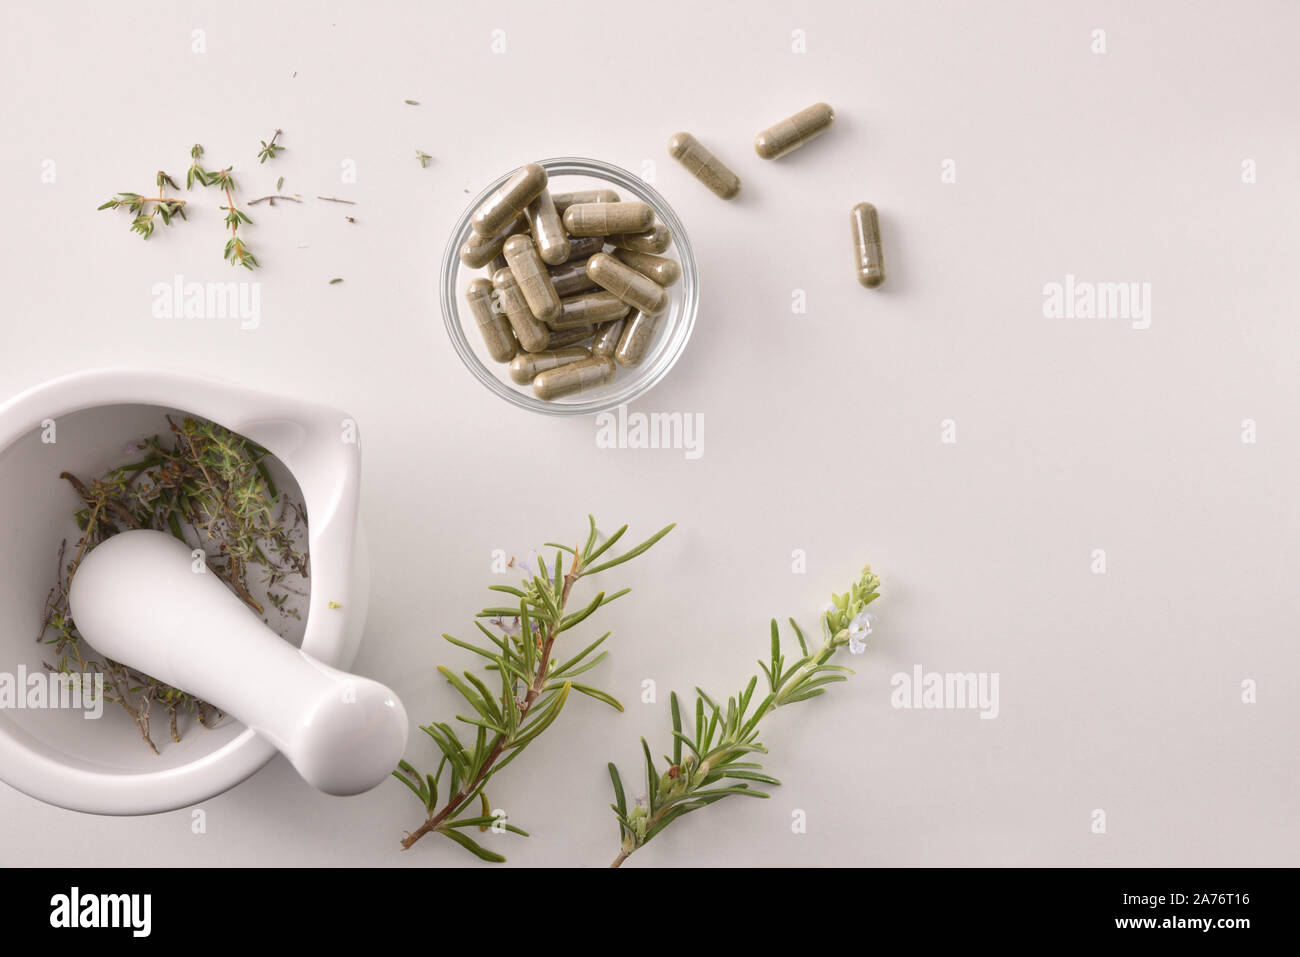 Mortar with herbs for processing natural capsules on white table. Alternative natural medicine concept. Top view. Horizontal composition. Stock Photo